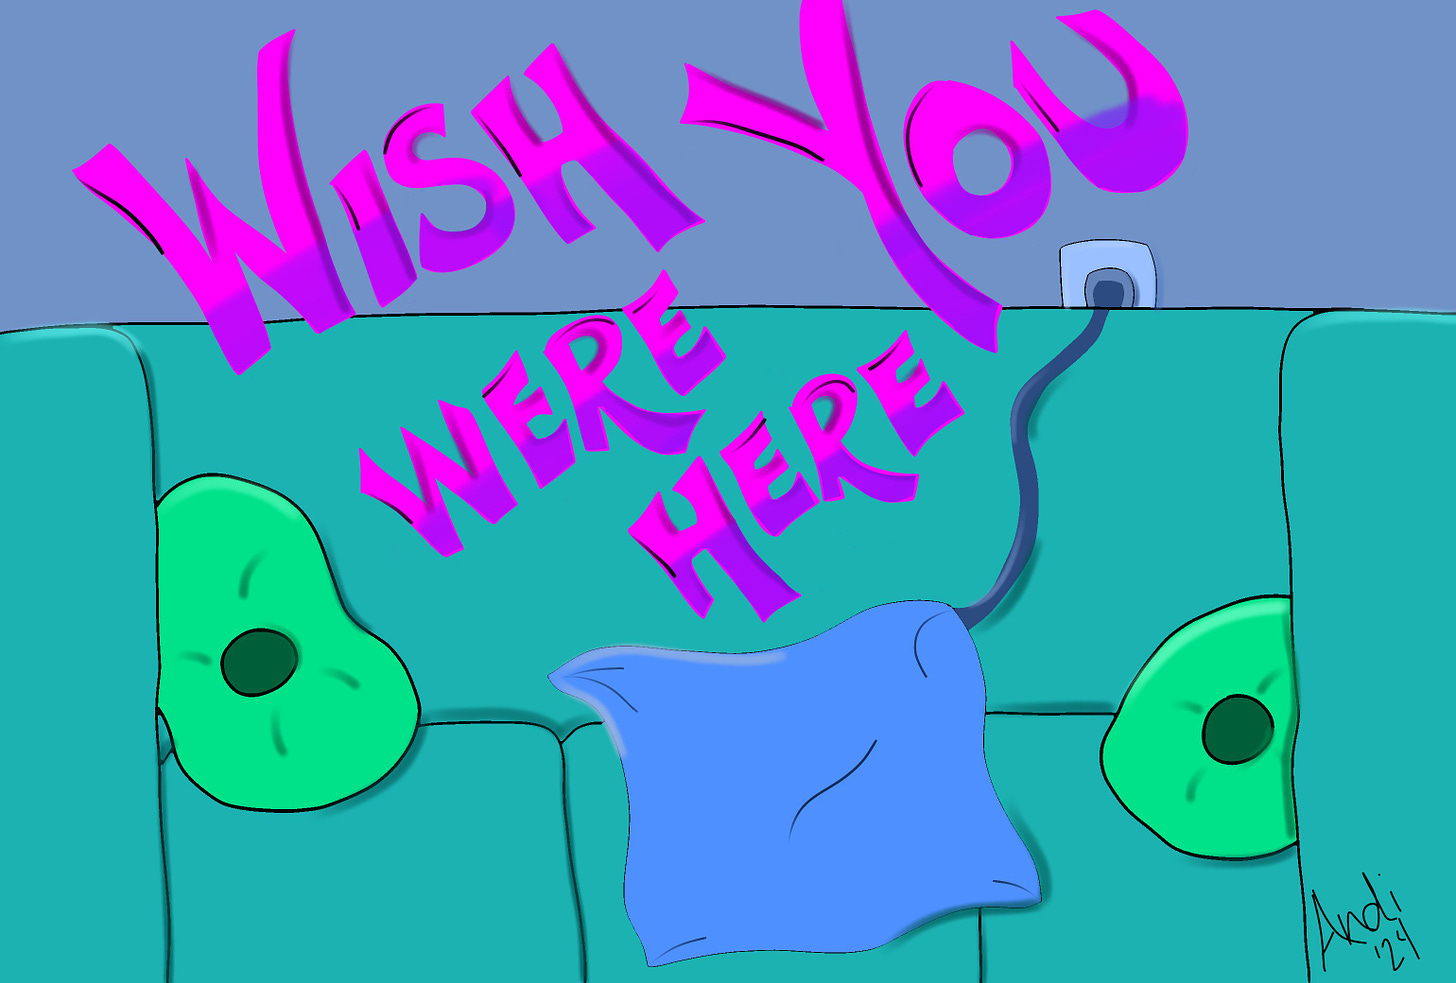 "Wish You Were Here" postcard showing a heating pad on the couch